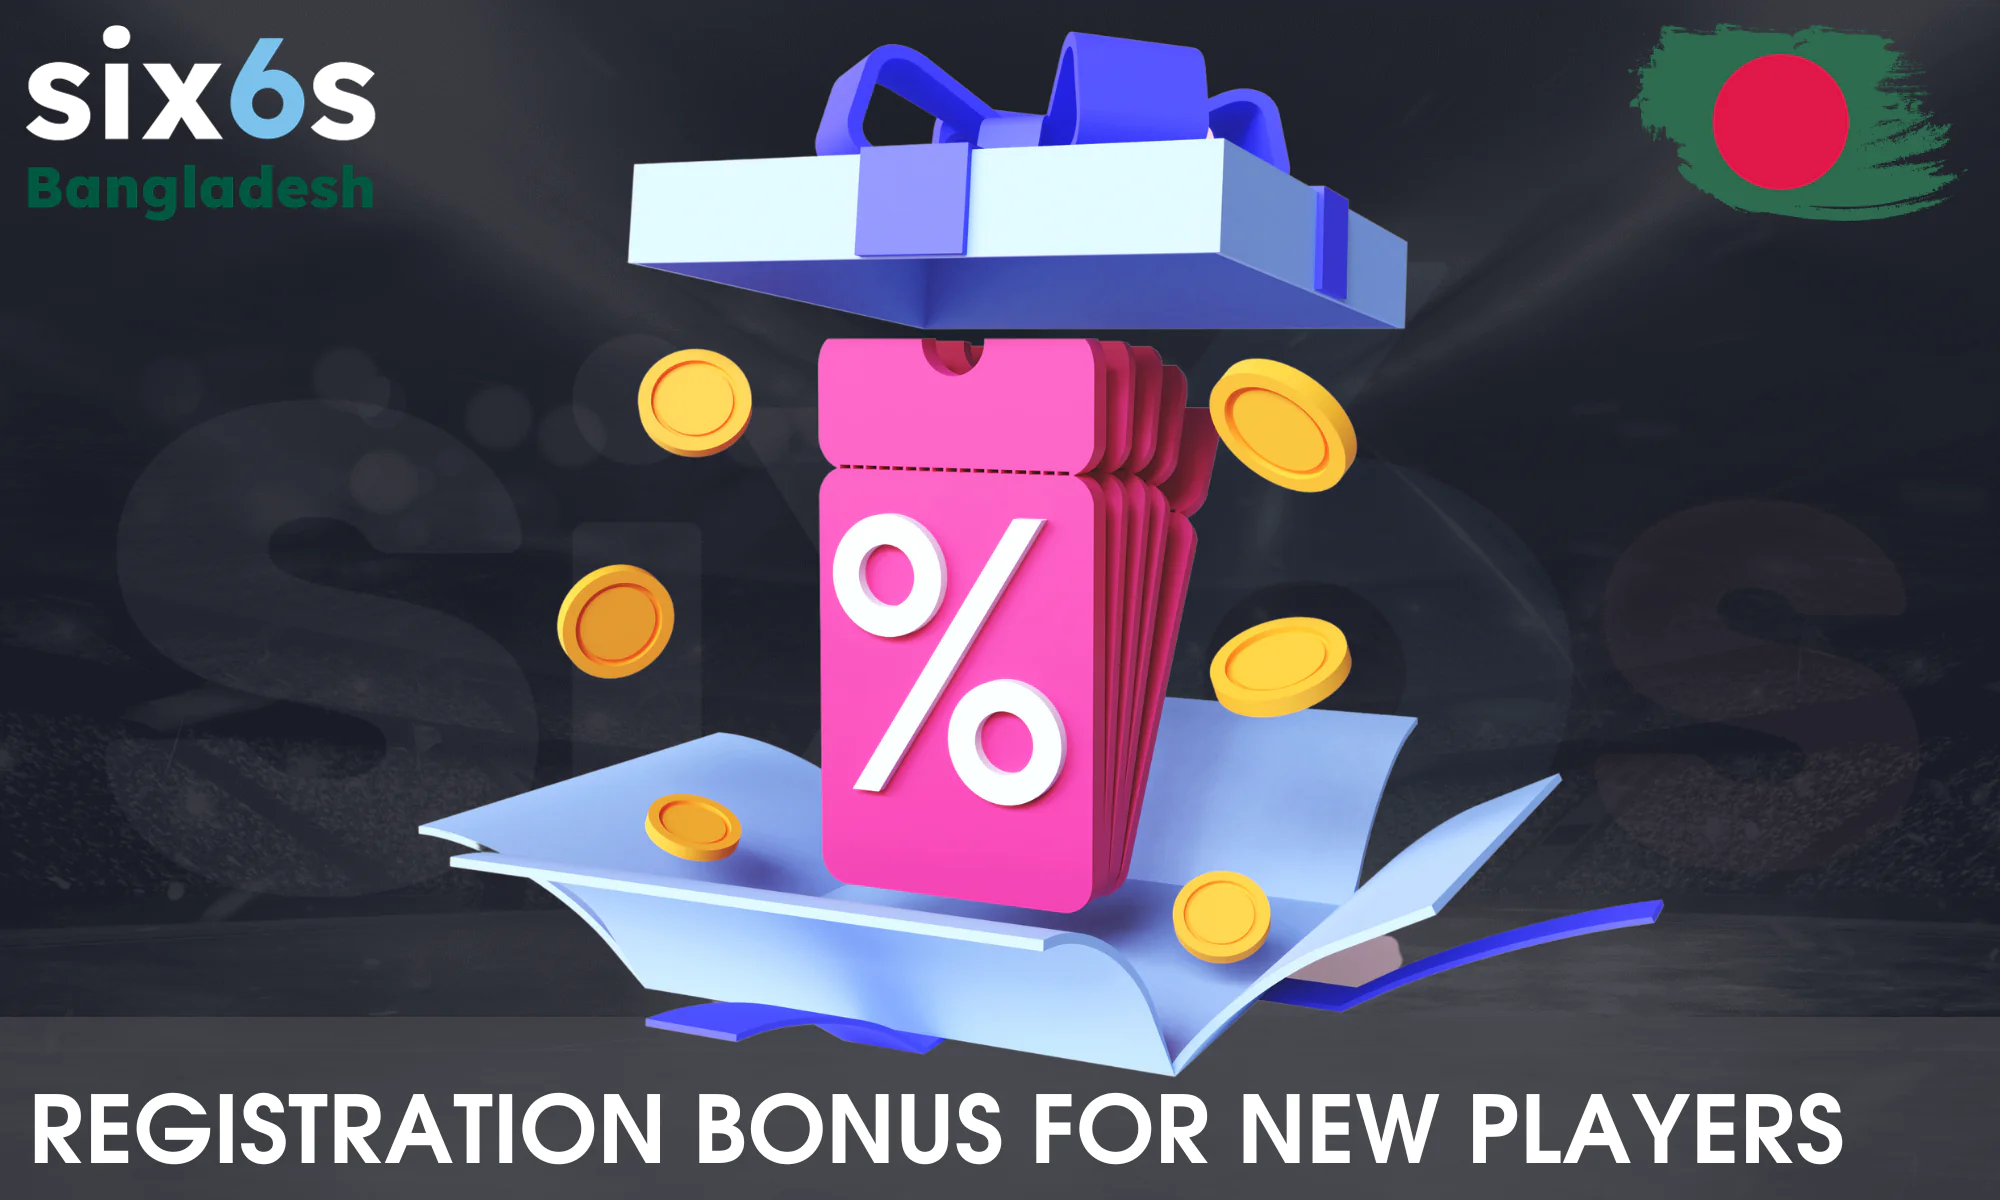 A registration bonus from Six6s is available for new players